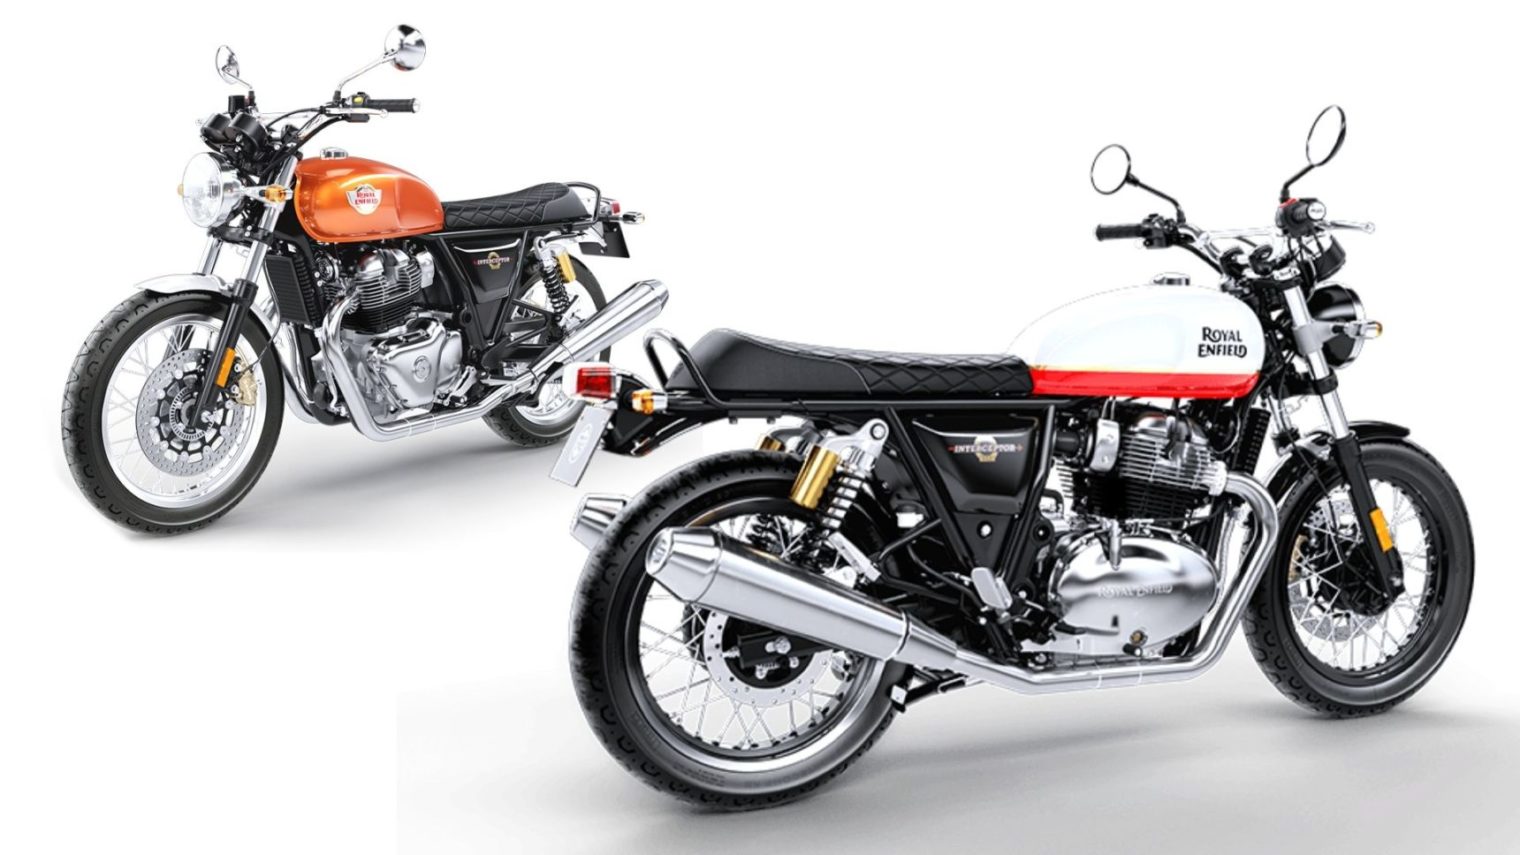 Over 20,000 Royal Enfield Interceptor & GT 650 Sold Last Fiscal In India